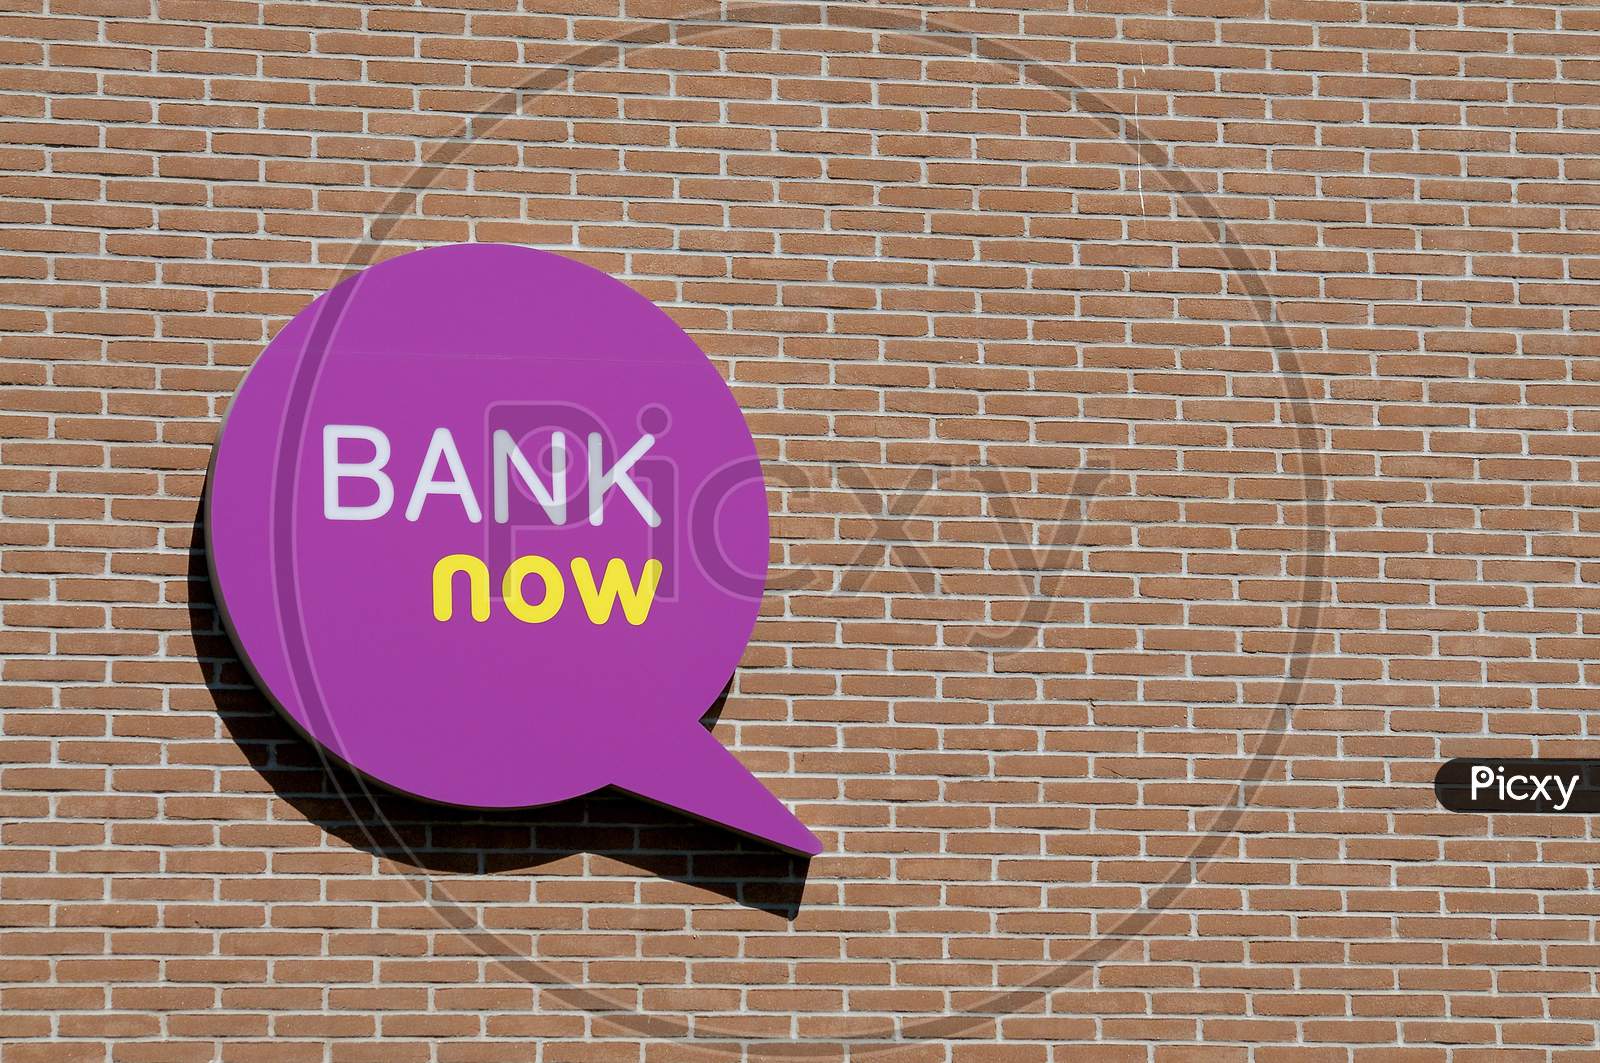 Bank Now Company Logo Hanging On A Brick Wall